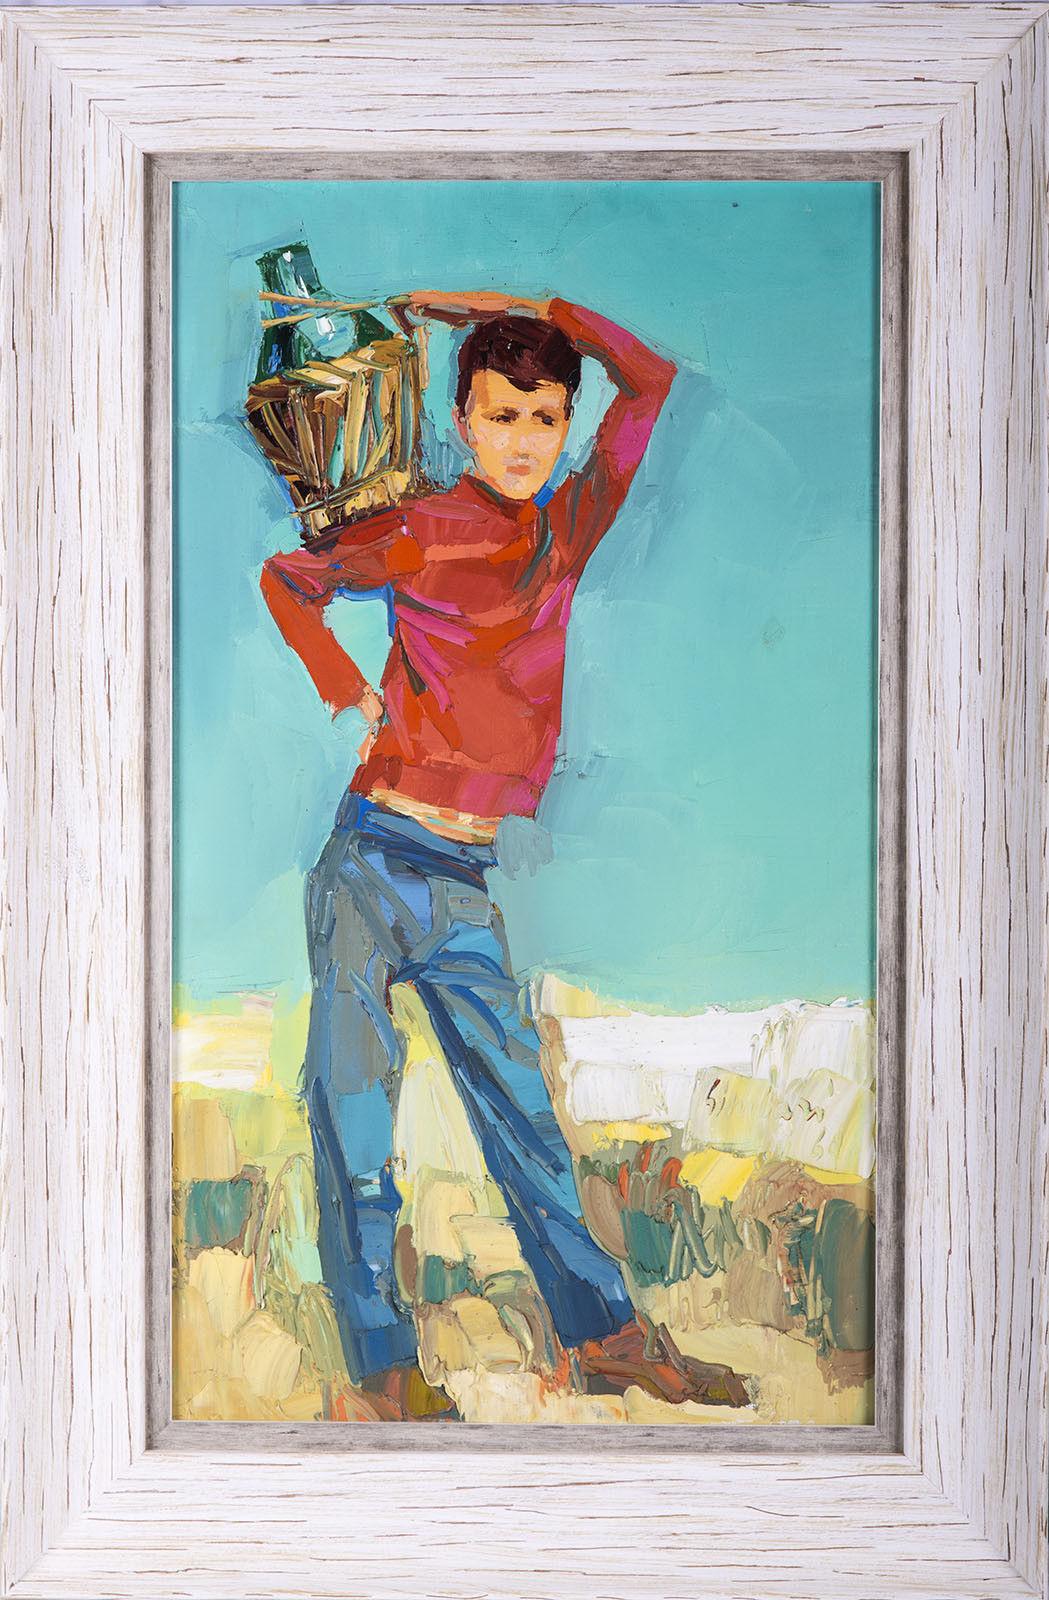 Artist: Nicola Simbari
Title: Boy with Wine Jug
Medium: Original Oil on Canvas
Size: 24" x 13 3/4"
Framed: 30" x 19 3/4"
Year: 1964
Condition: This piece is in perfect condition

All offers will be considered and shipping is free! 

  Beautiful